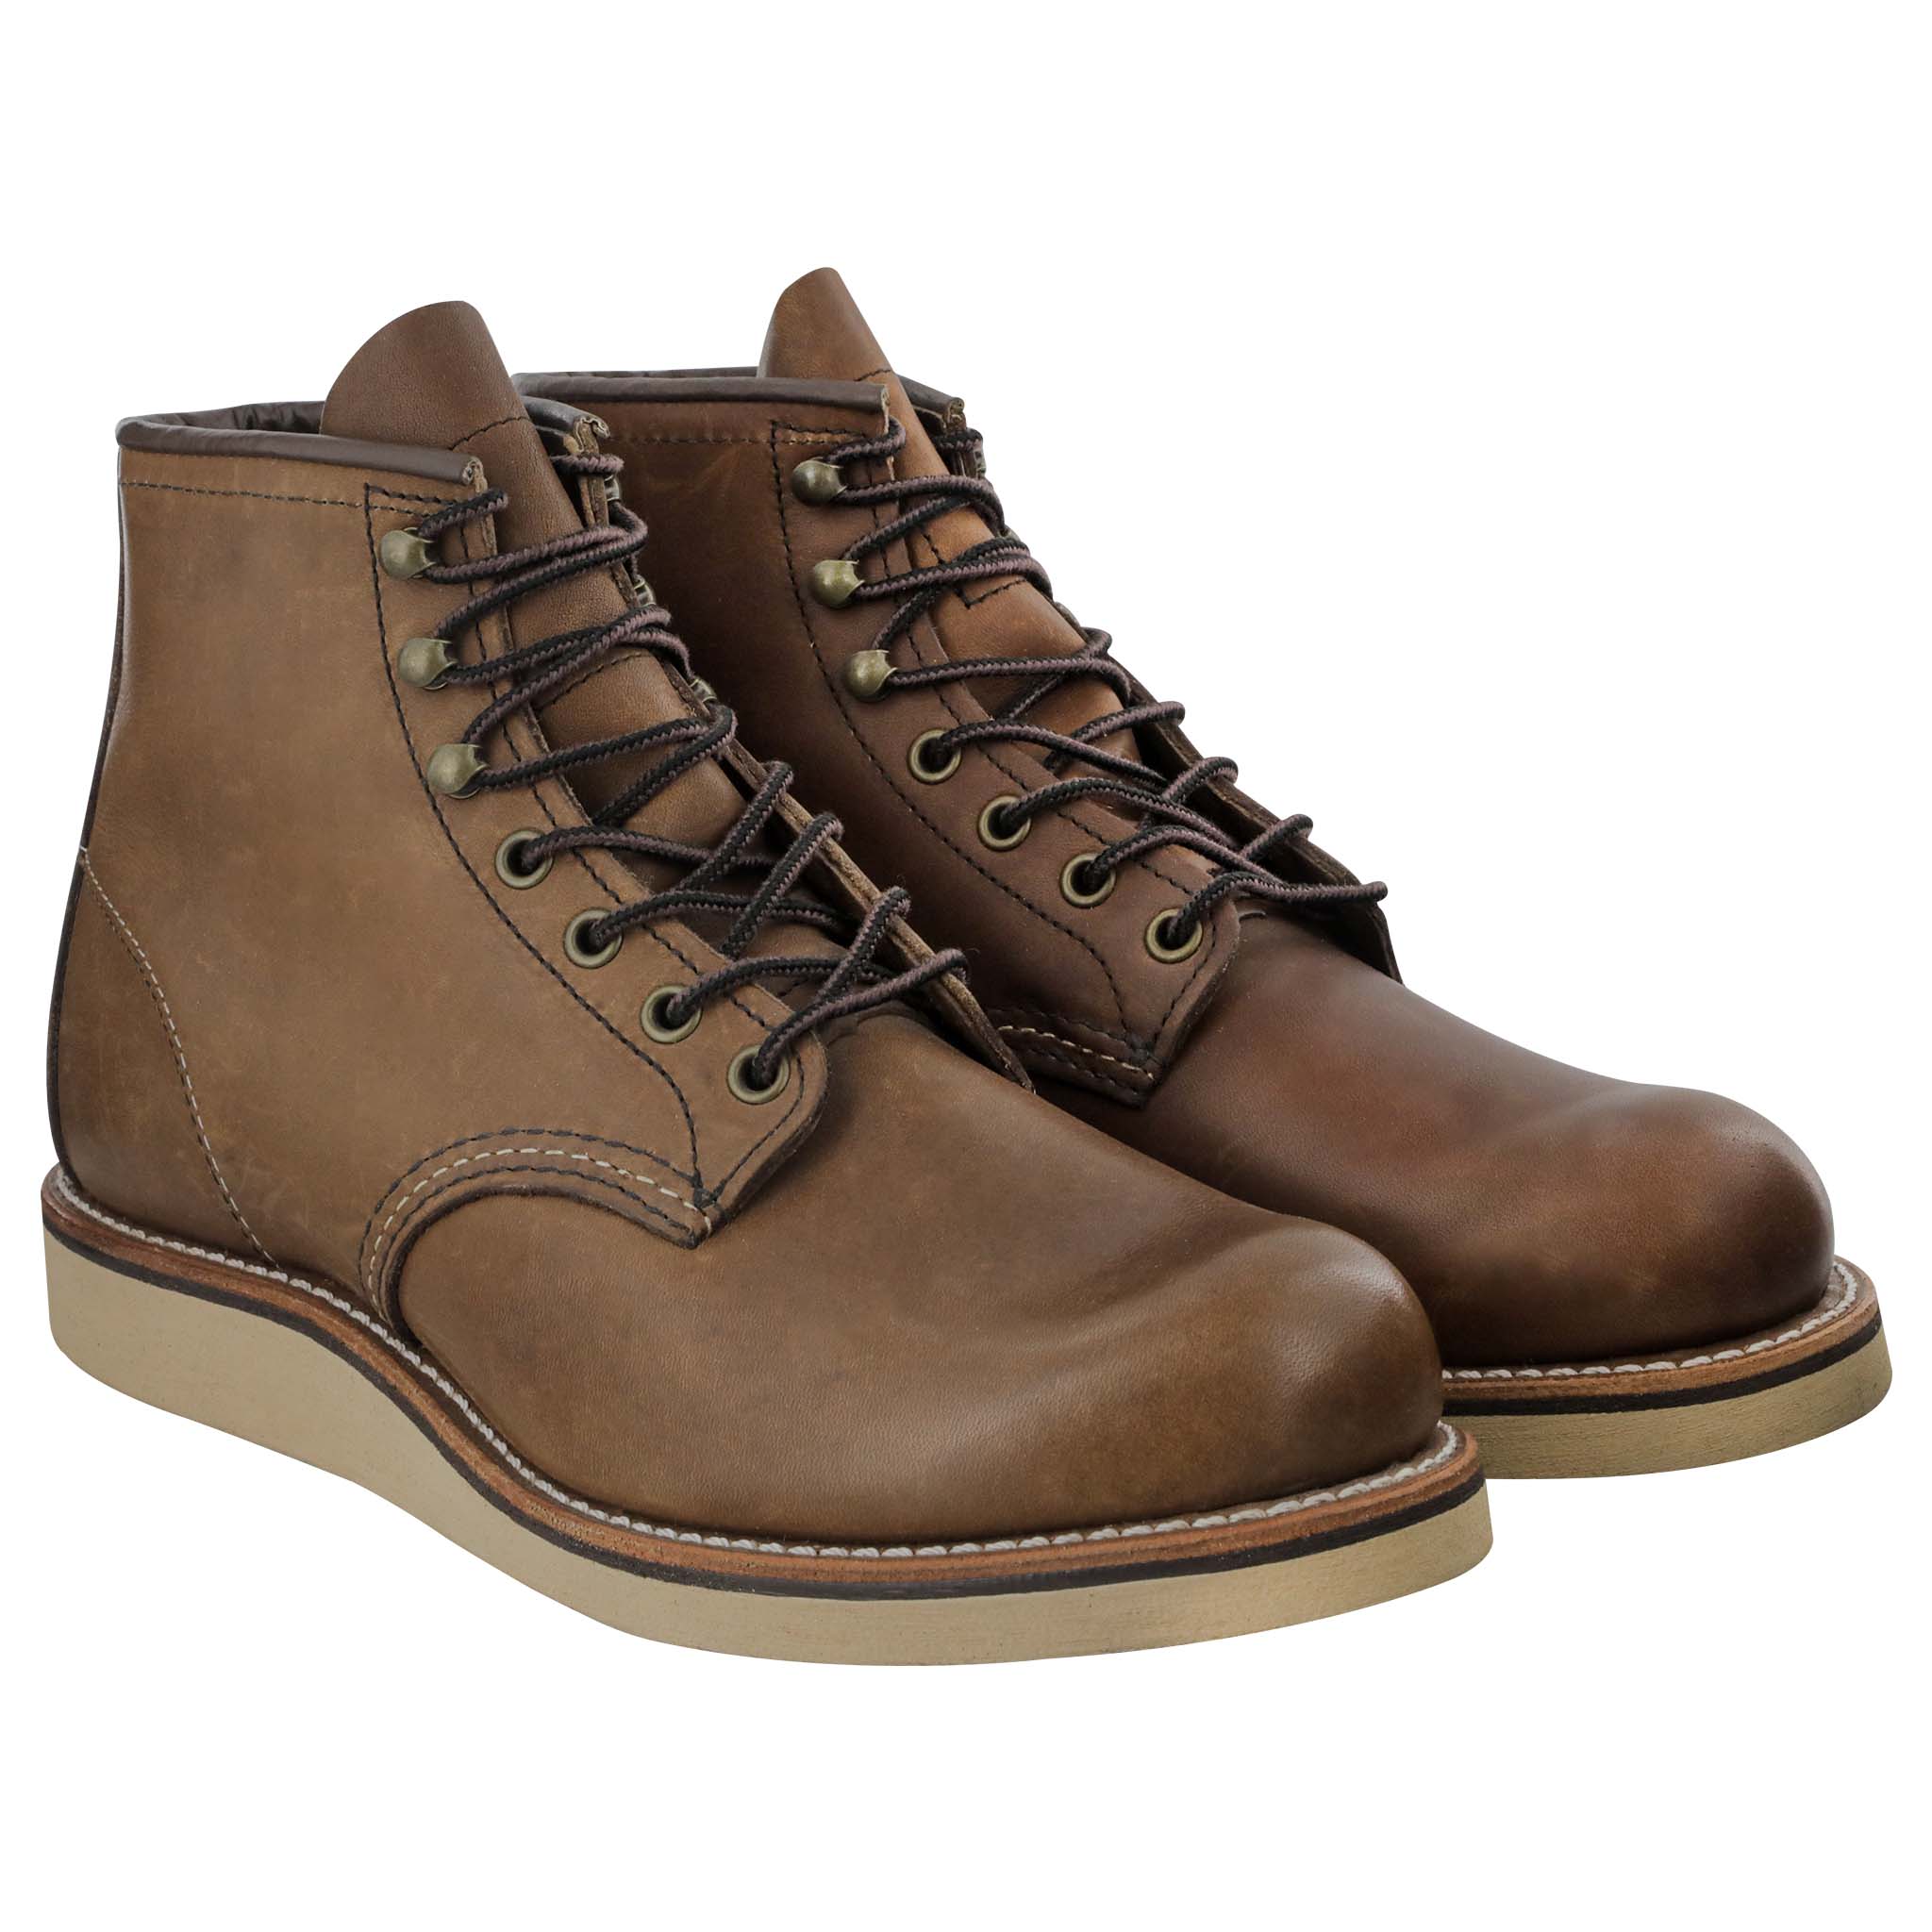 Red Wing Shoes | Purpose Built Footwear | Work Boots - Gunthers Supply ...